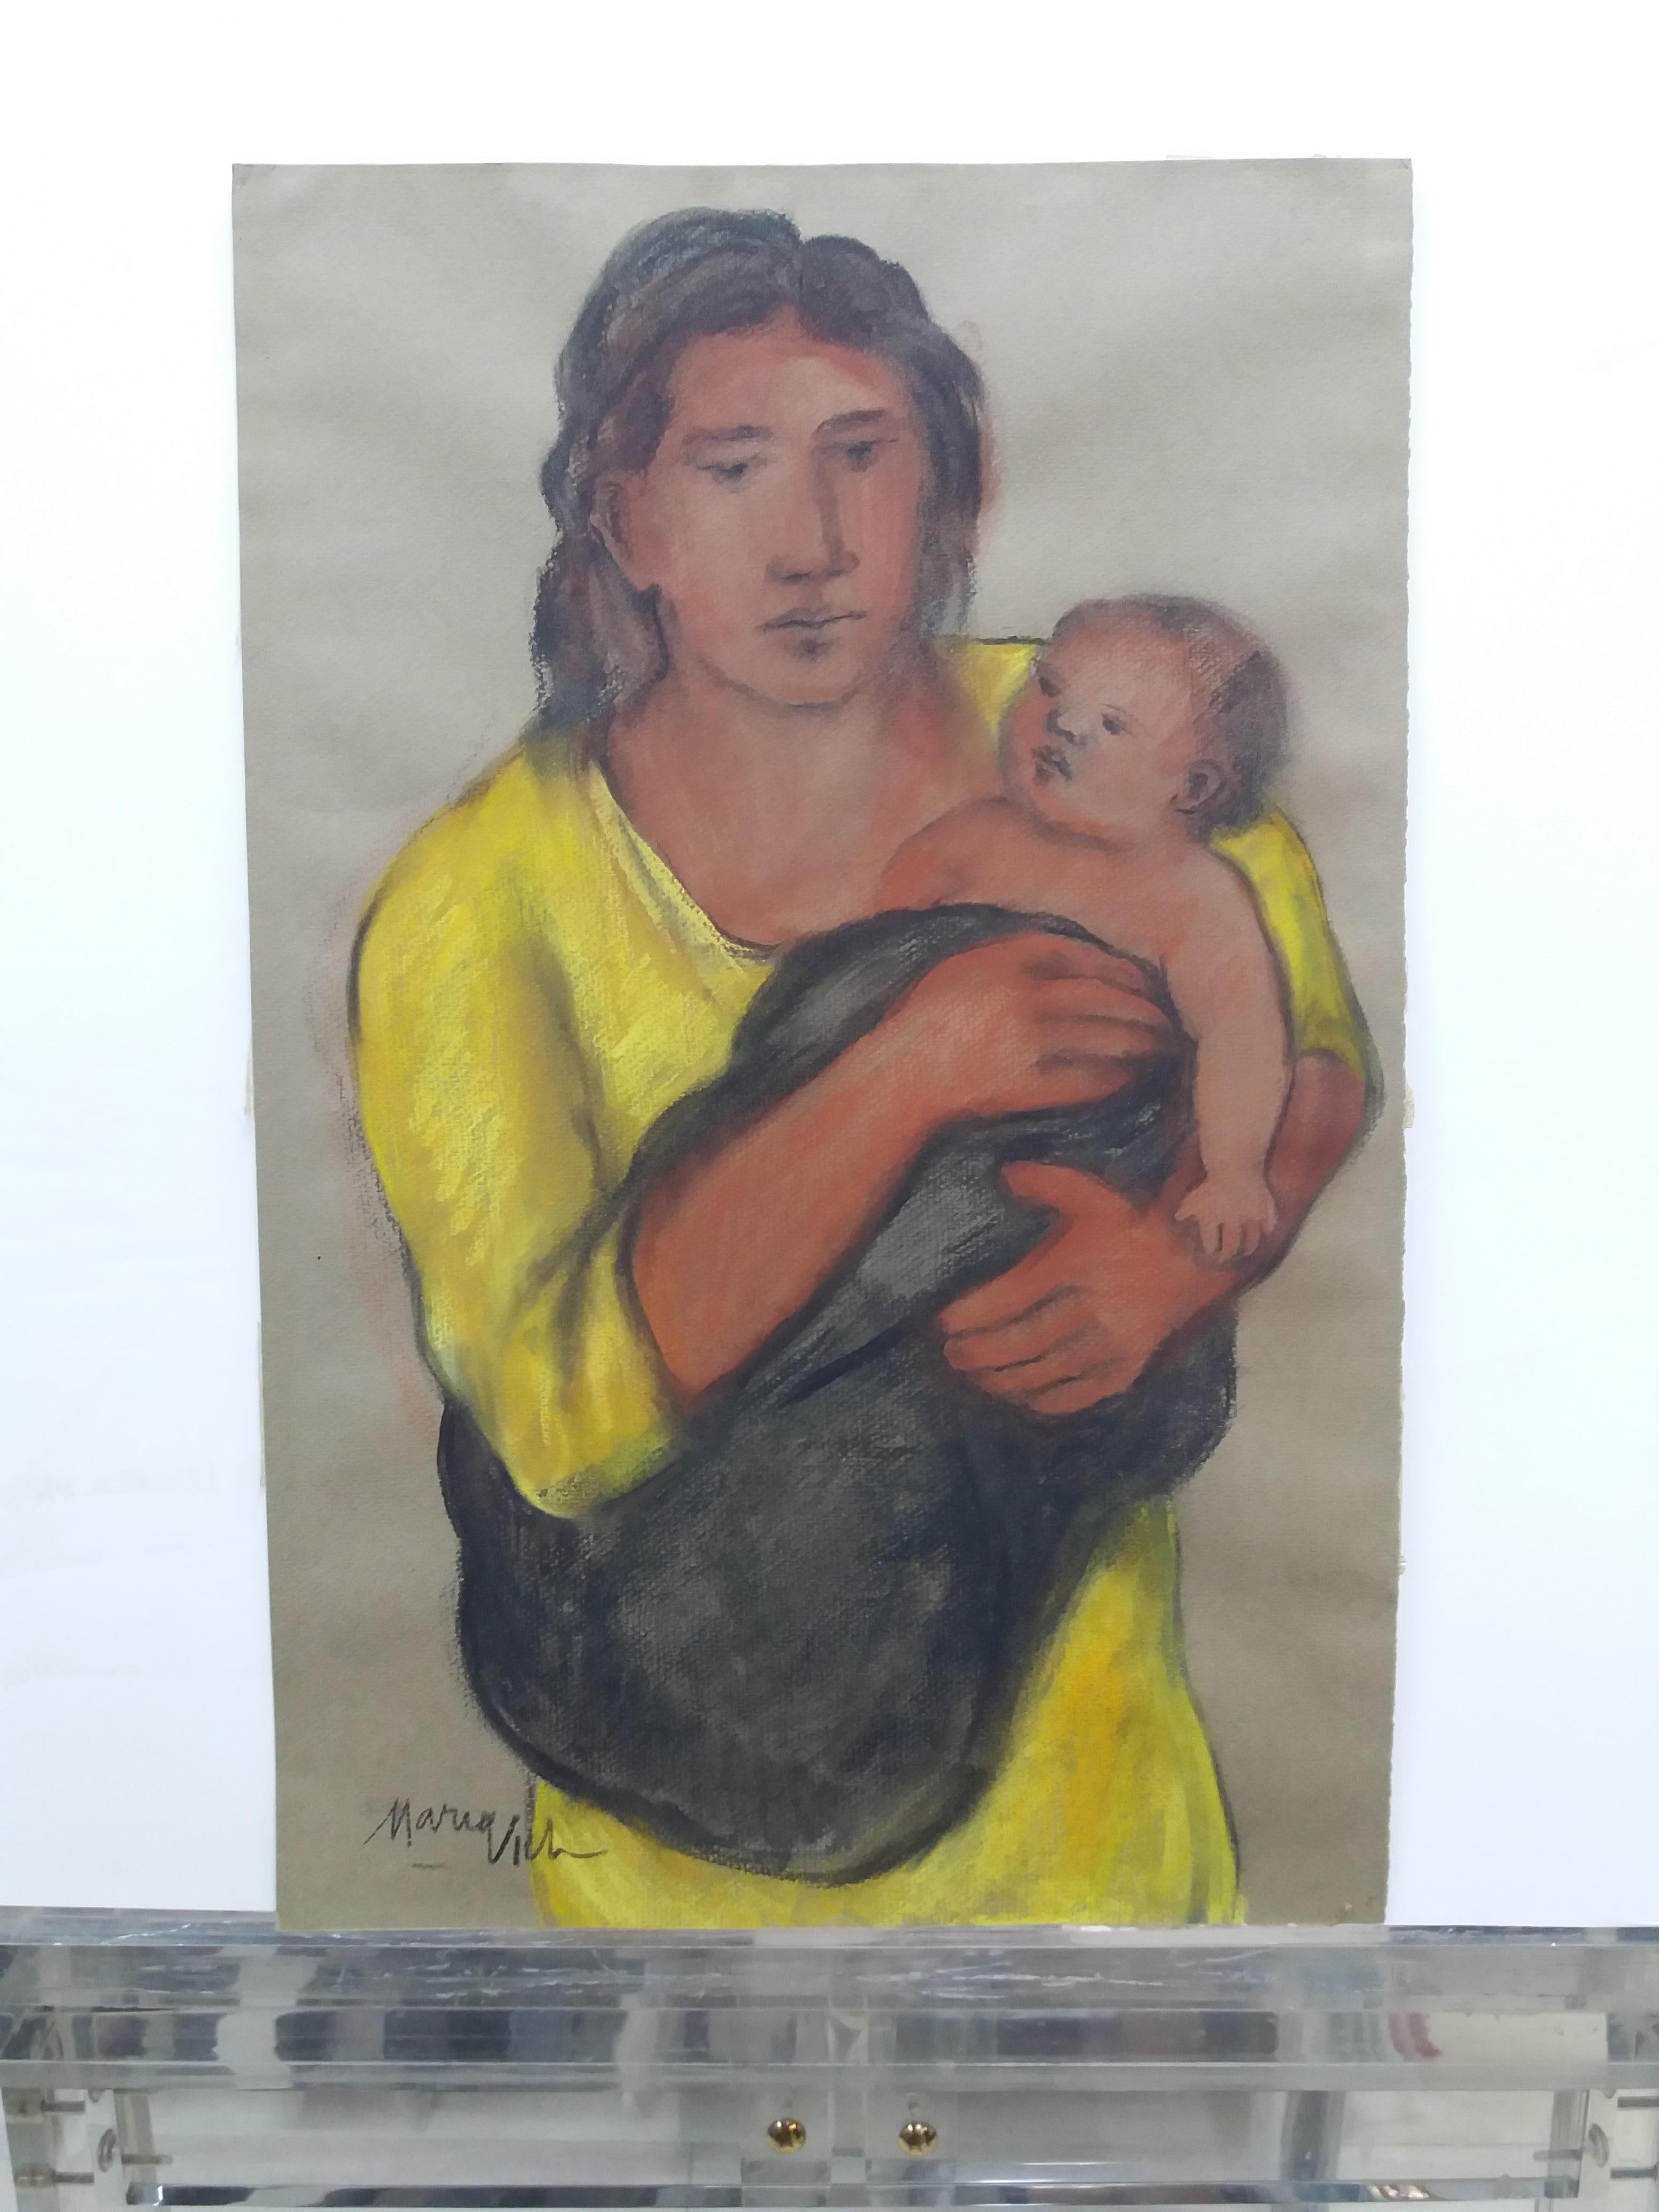 MATERNIDAD. original pastel painting. Framed
Maria Vich is an artist from the Balearic Islands. Influenced by her teacher Tito mCittadini, she focuses her work on reflecting the countryside environment, its workers, its landscapes. With a lyrical